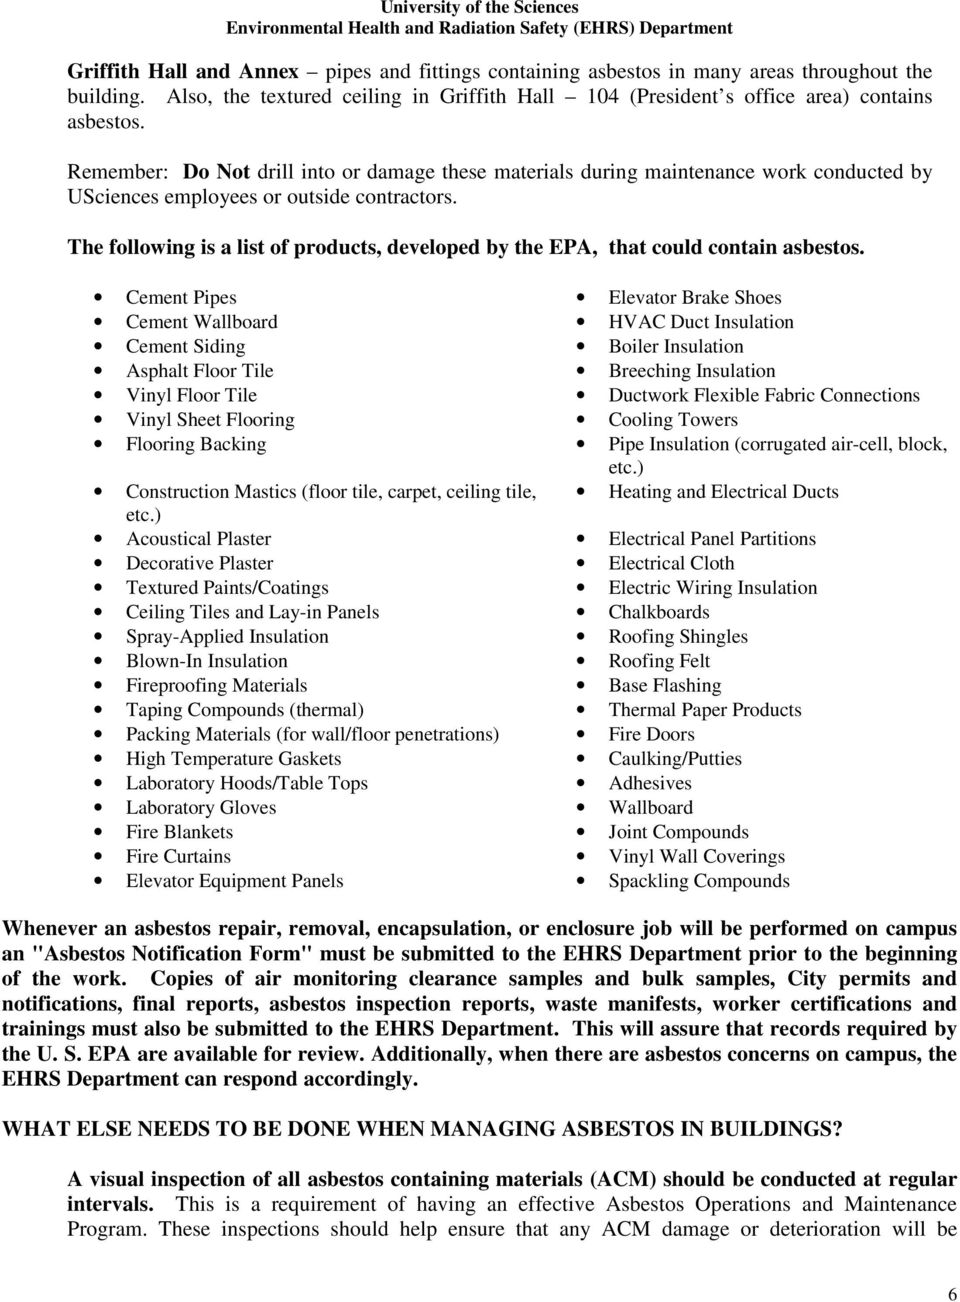 The following is a list of products, developed by the EPA, that could contain asbestos.